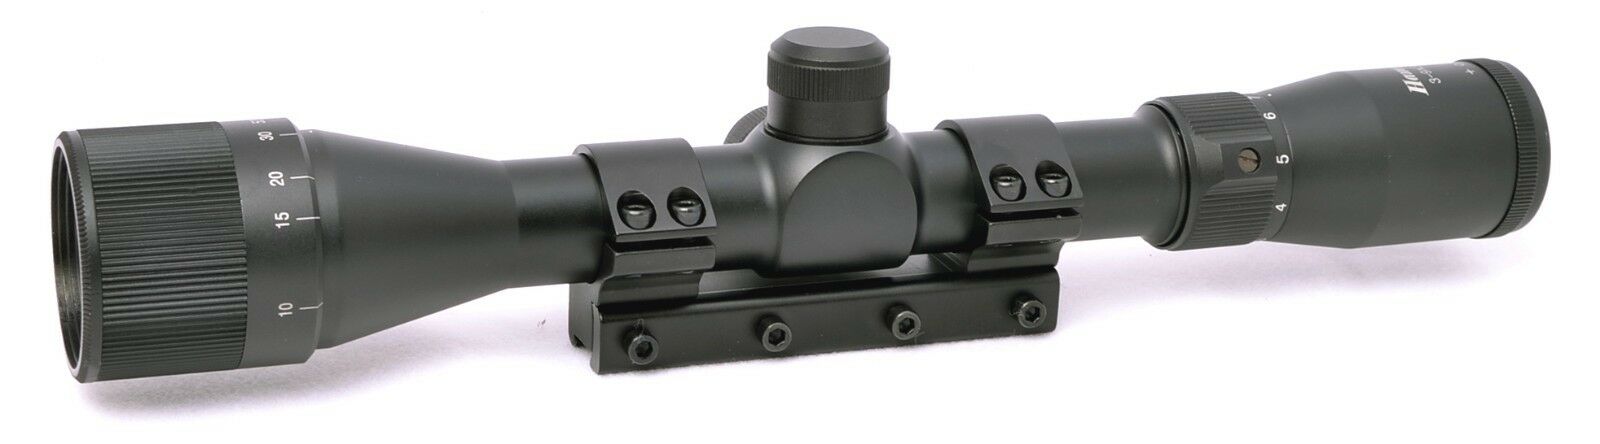 Hammers Magnum Spring Air Gun Rifle Scope 3-9x32ao W/ Stop Pin One Piece Mount